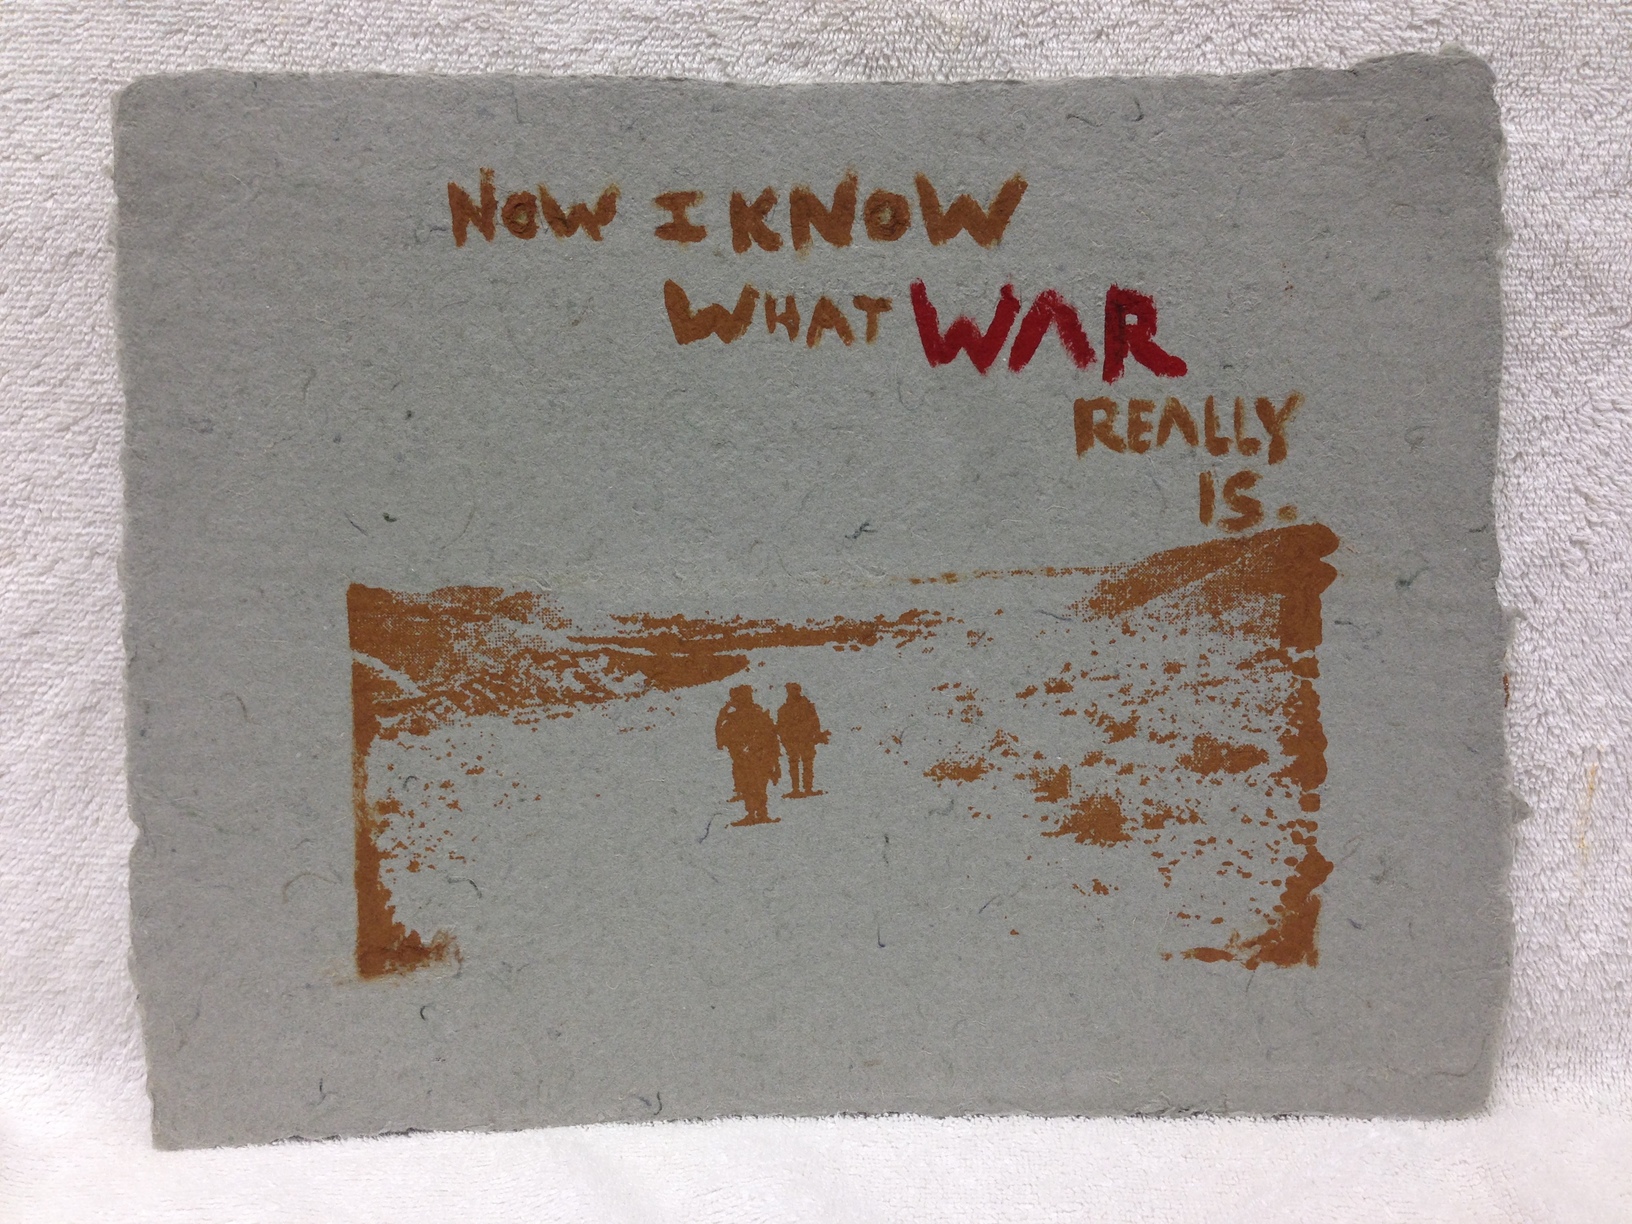 Will Rork Marines - Afghanistan _Now I Know_ 2012 Silkscreen pulp painting on Handmade Paper from military uniforms 11 x 14 Bergen Community College Workshop IMG_1034JPG.jpg